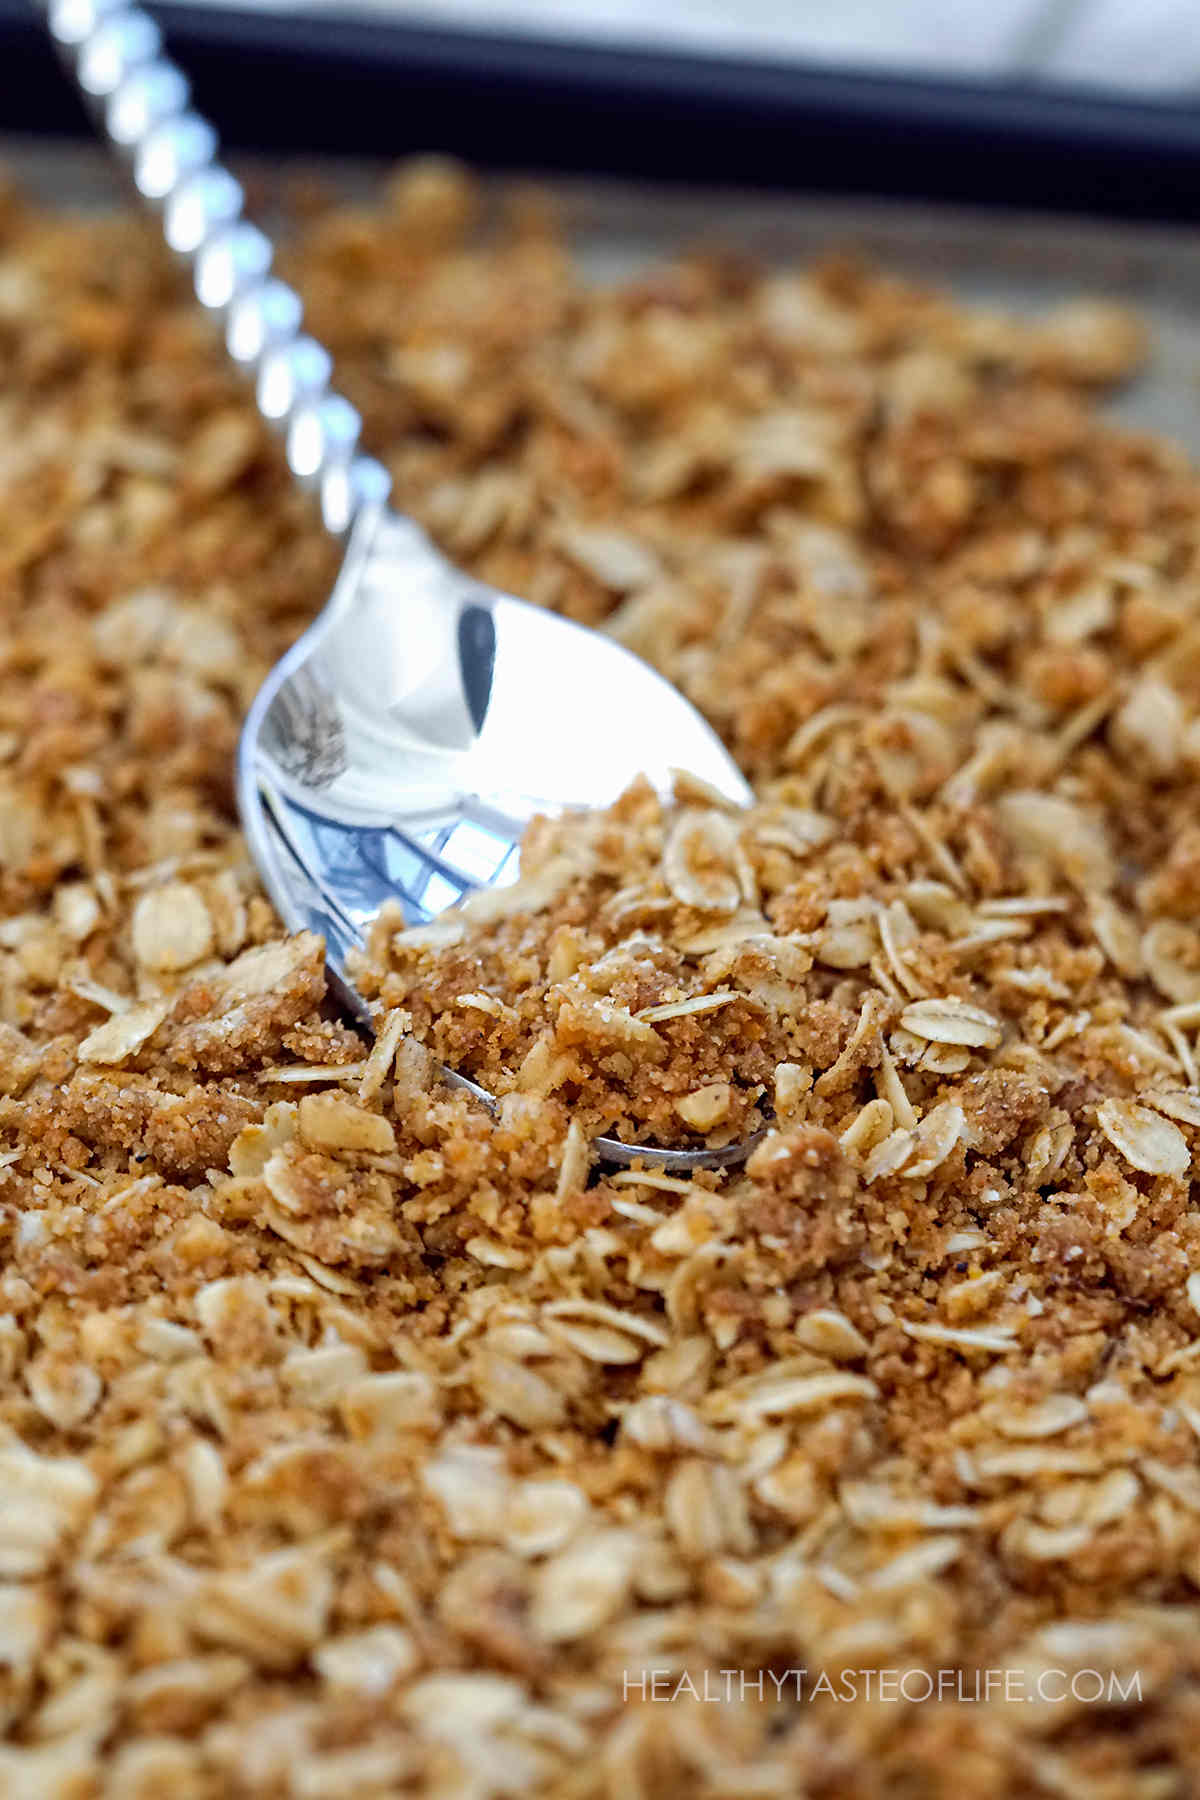 Crumble topping with oats - baked oat crumble topping (without fruit) which can be used as granola.